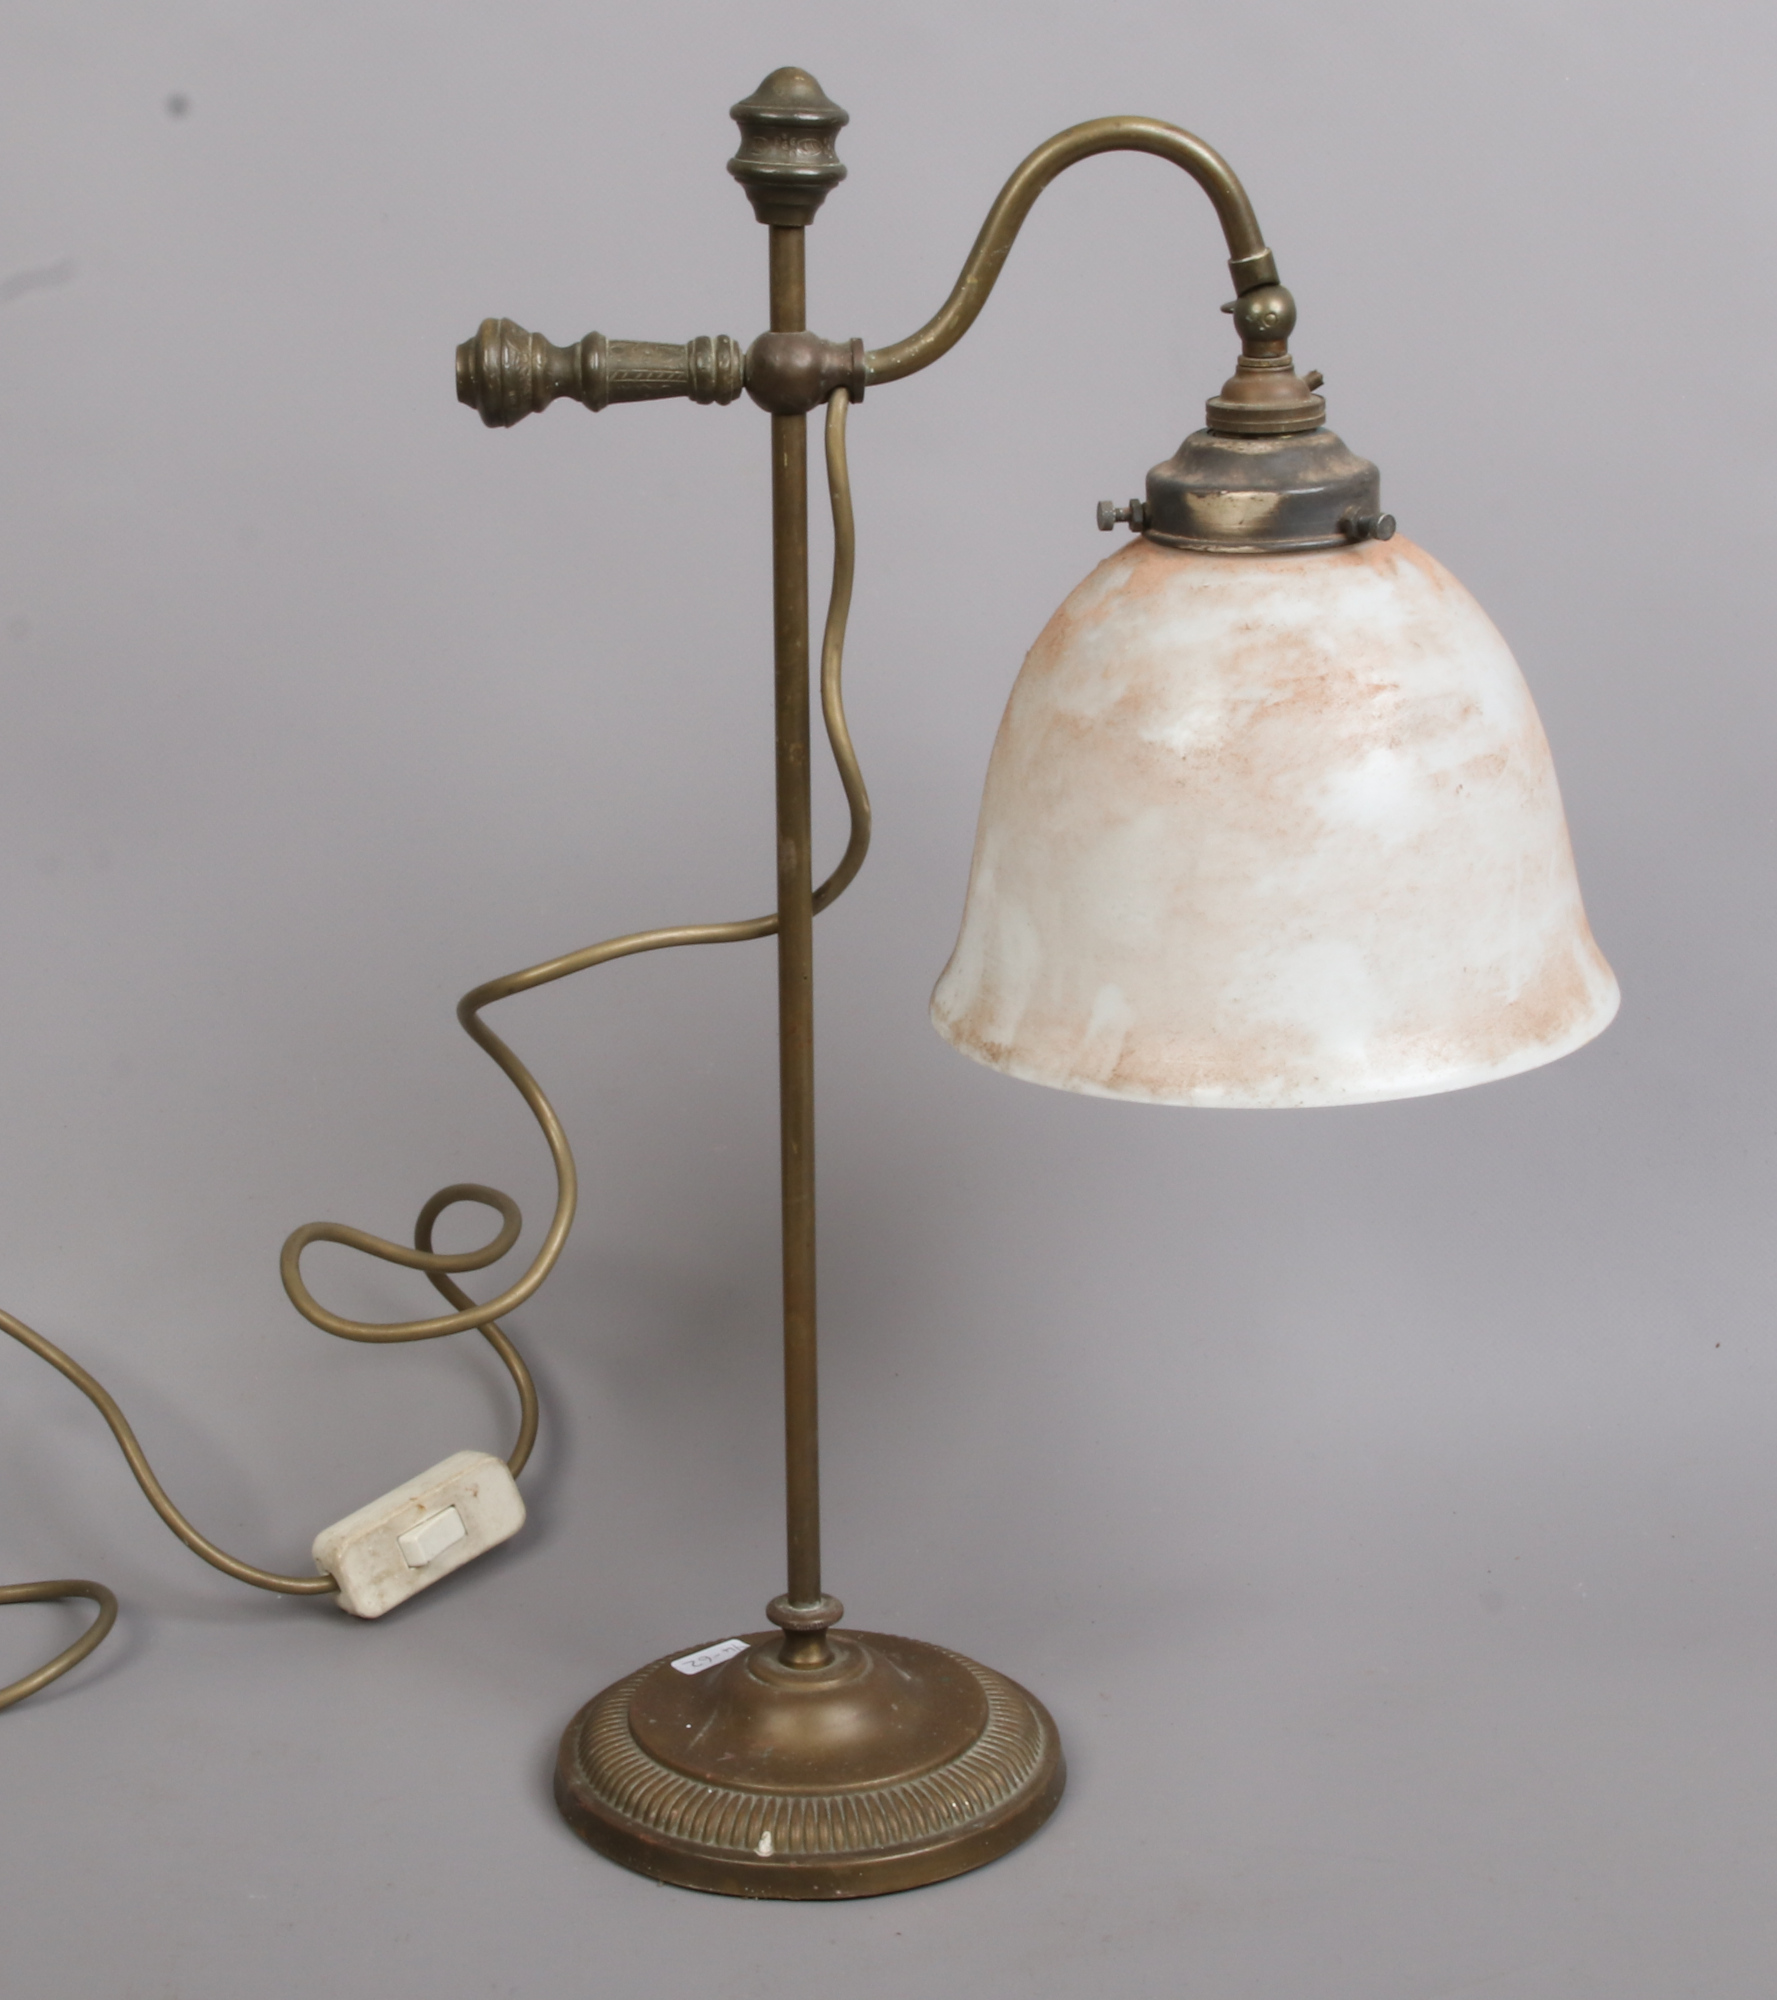 A bronze rise and fall adjustable students lamp with glass shades.